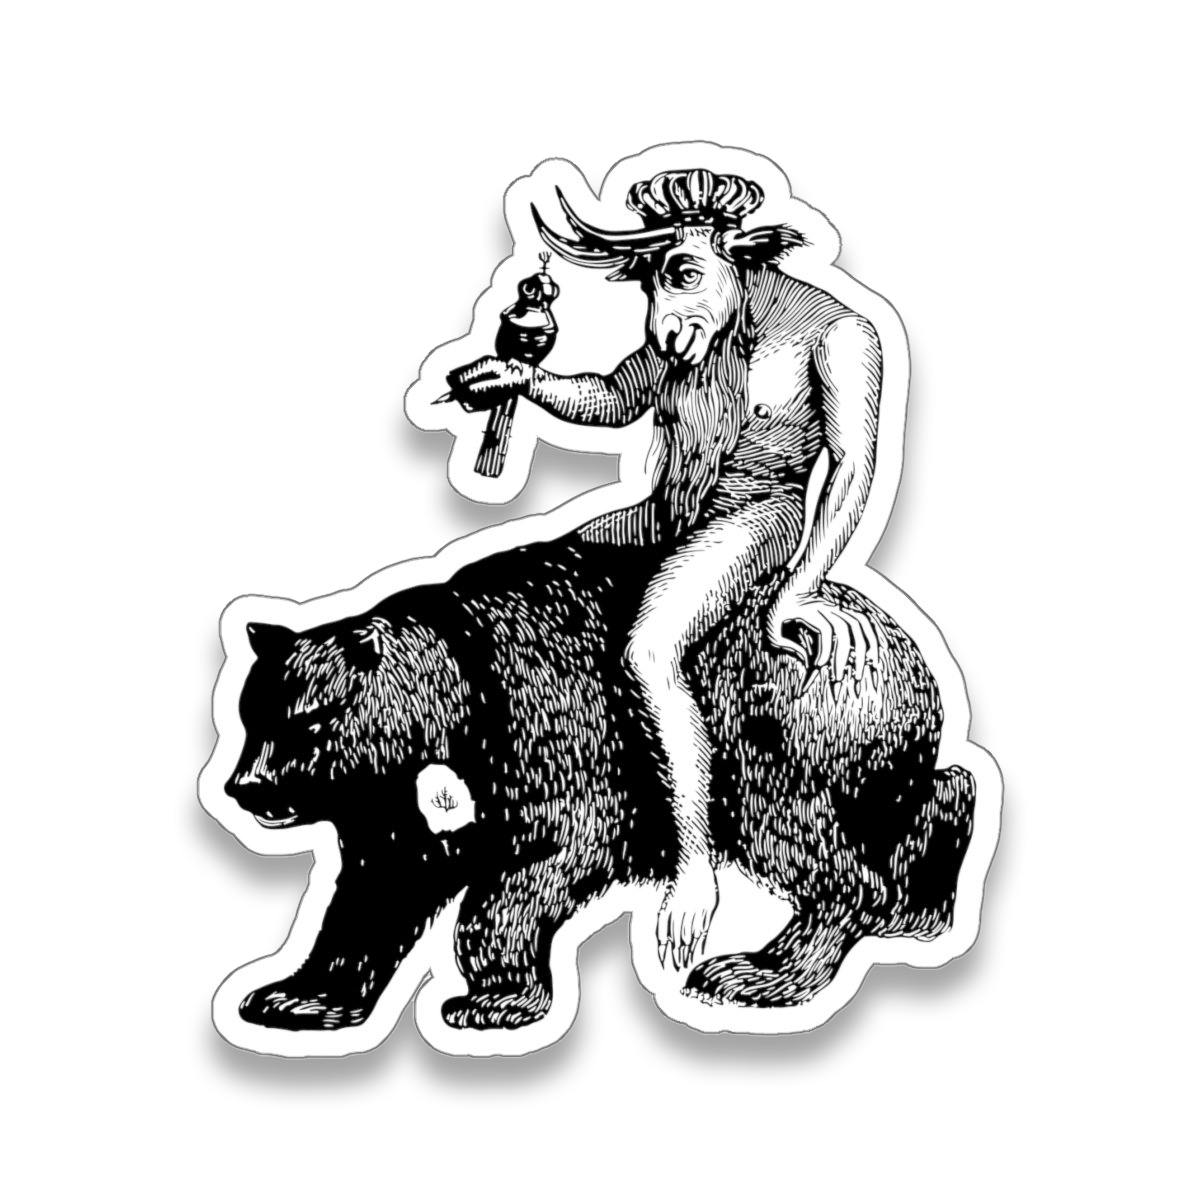 Balam demon sticker from 1863 illustration in Dictionnaire Infernal